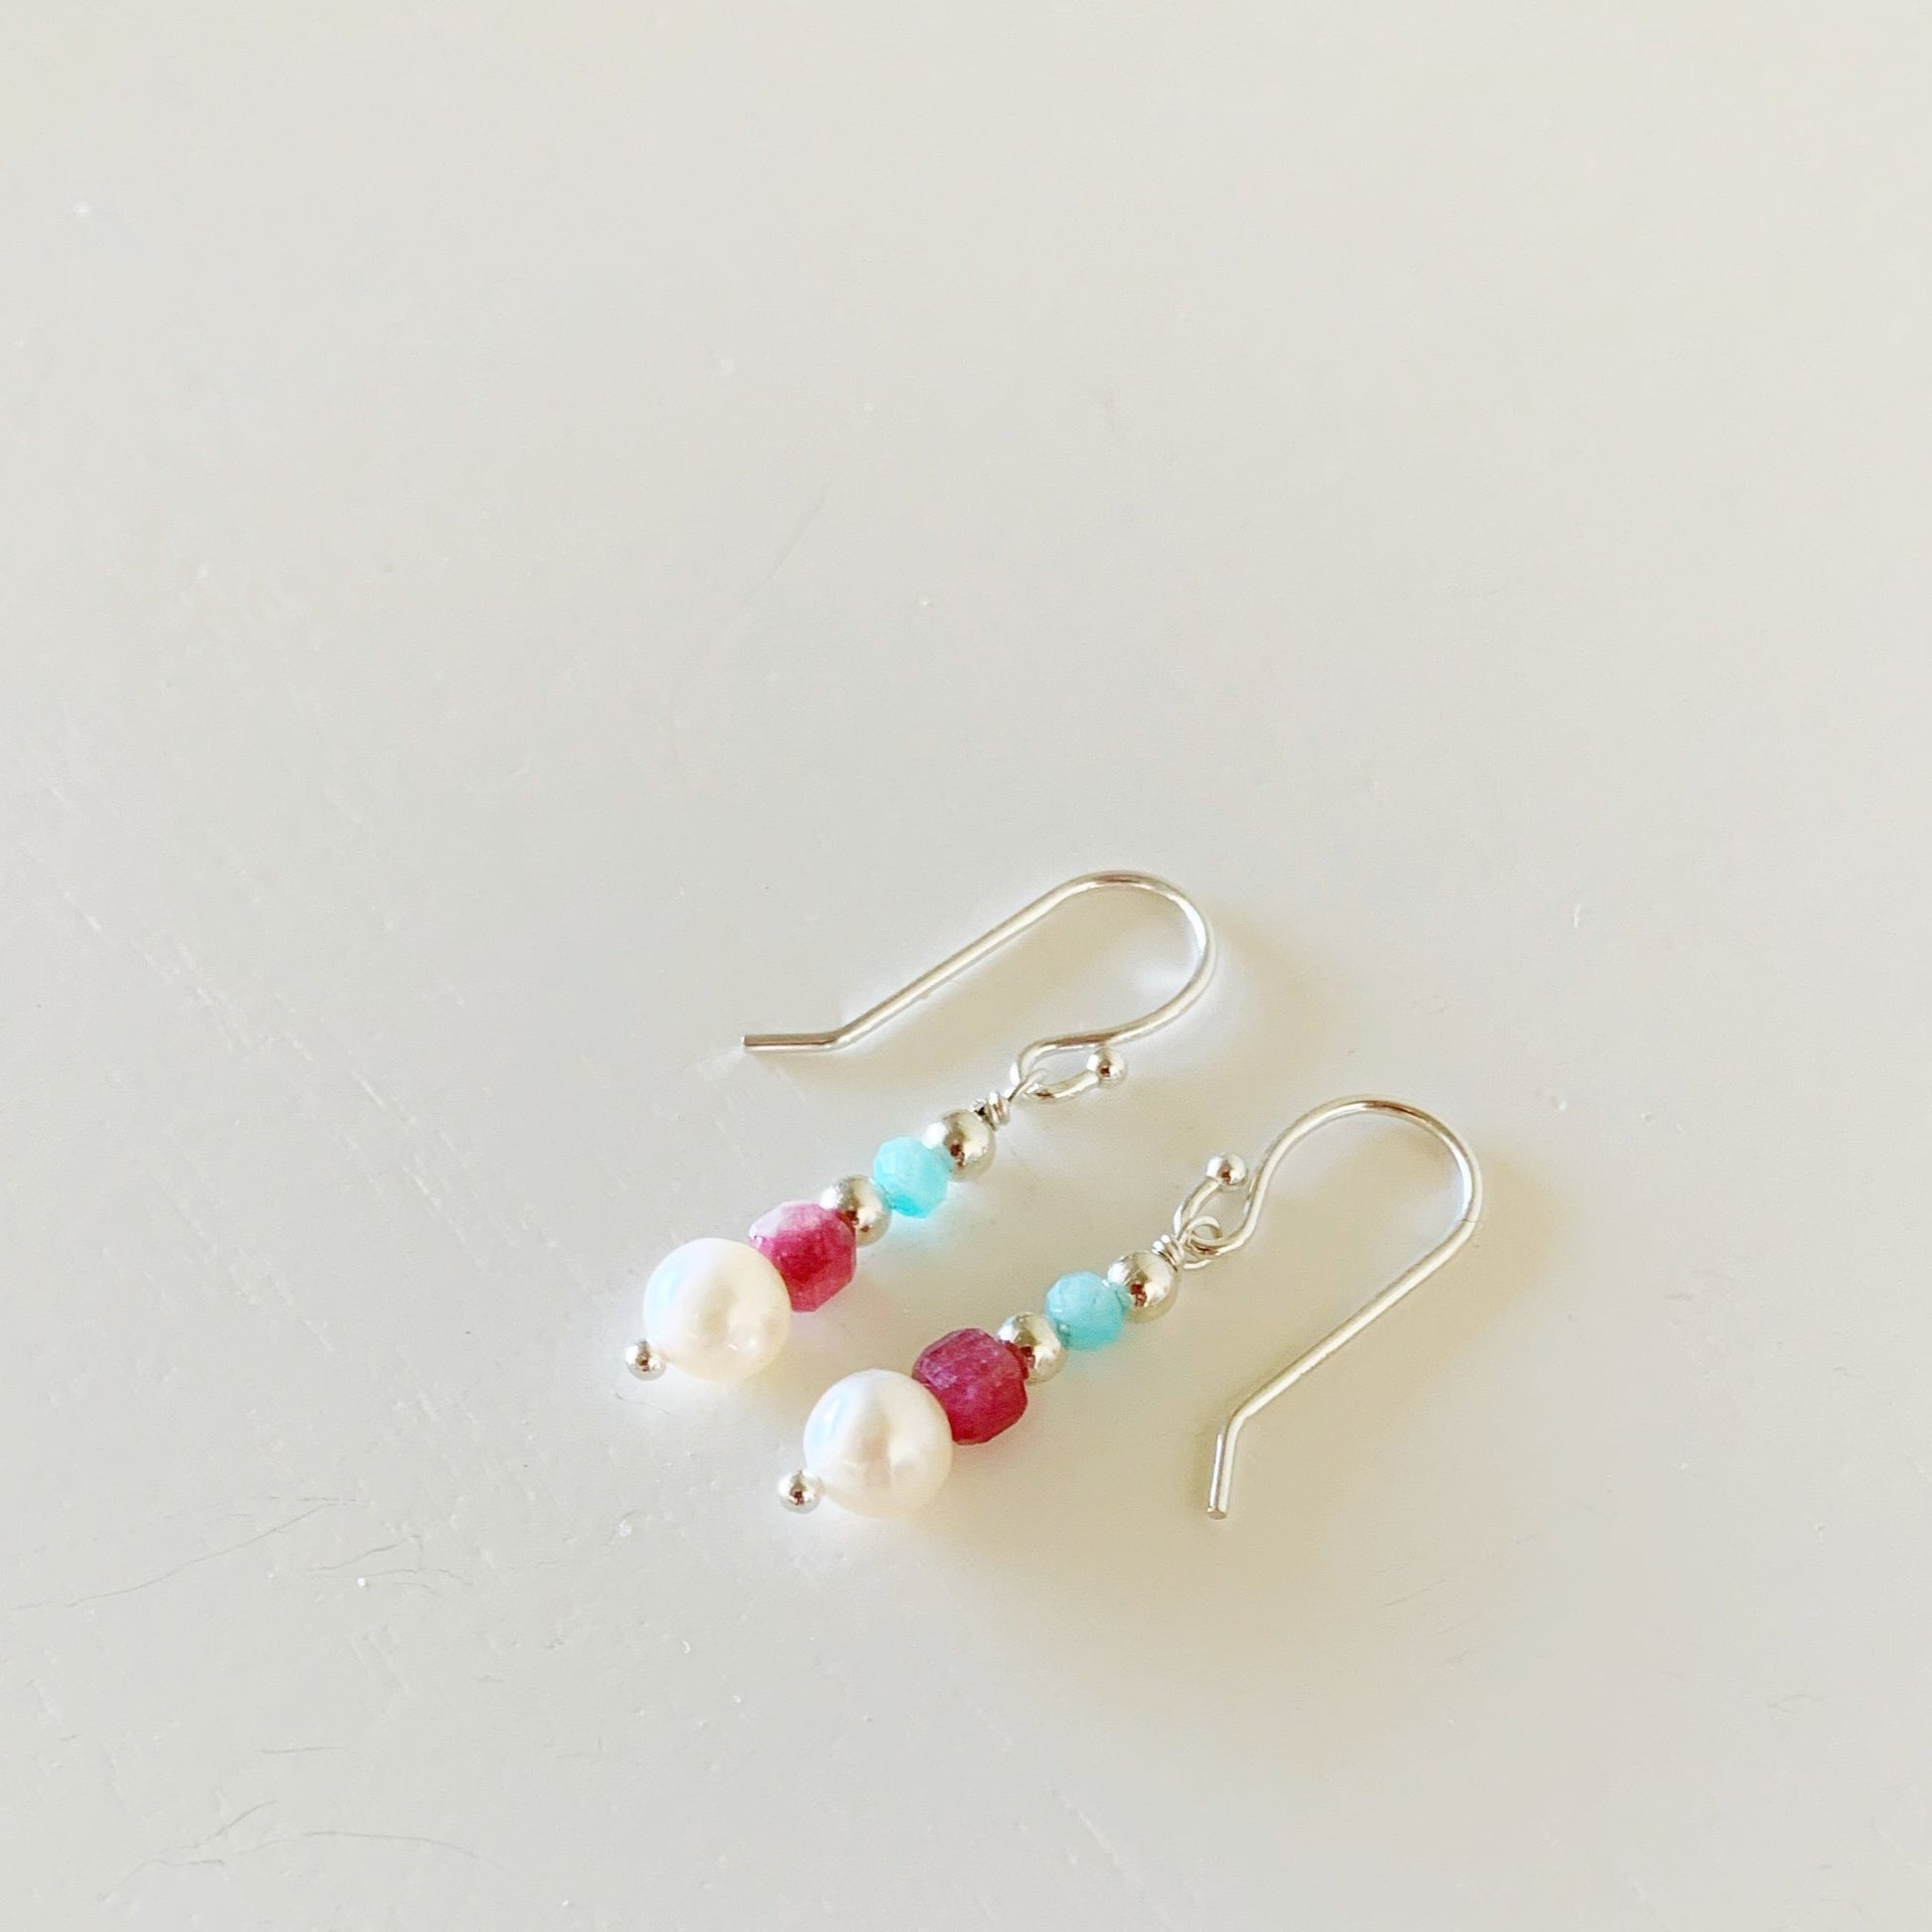 the harwich port earrings by mermaids and madeleines are a petite linear style designed with freshwater pearls, pink tourmaline cube beads and amazonite rondelles with sterling silver findings. this pair of earrings is facing to the left and photographed flat on a white surface